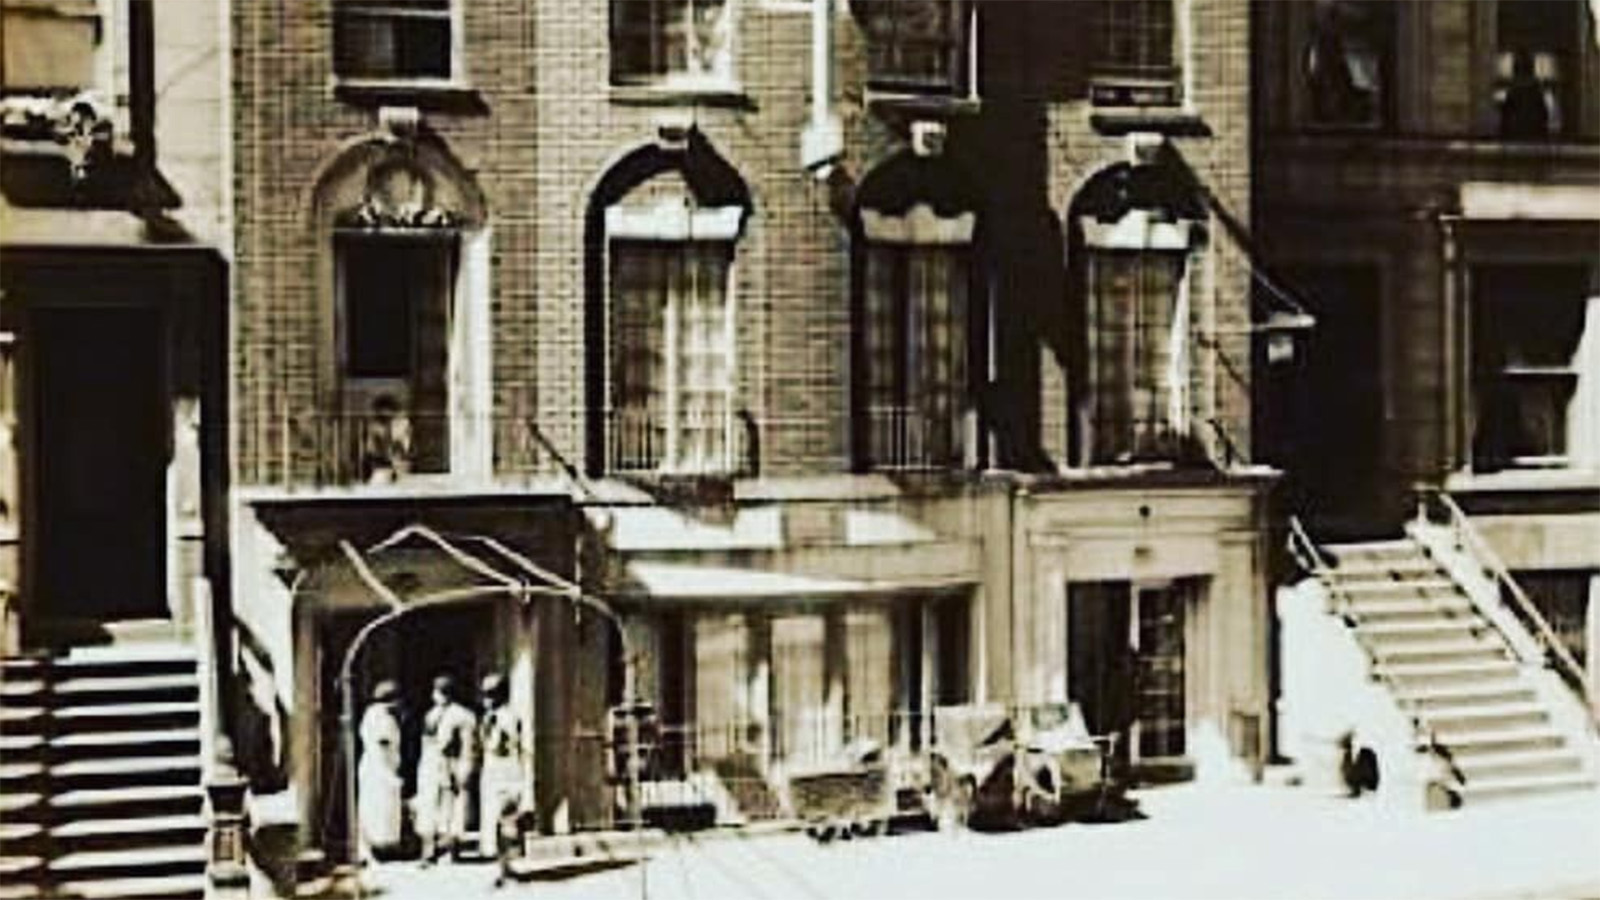 A sepia-toned photo of the front of a large, brick, multi-storied residential building along a street. Three people stand clustered together in one nook on the ground-level.